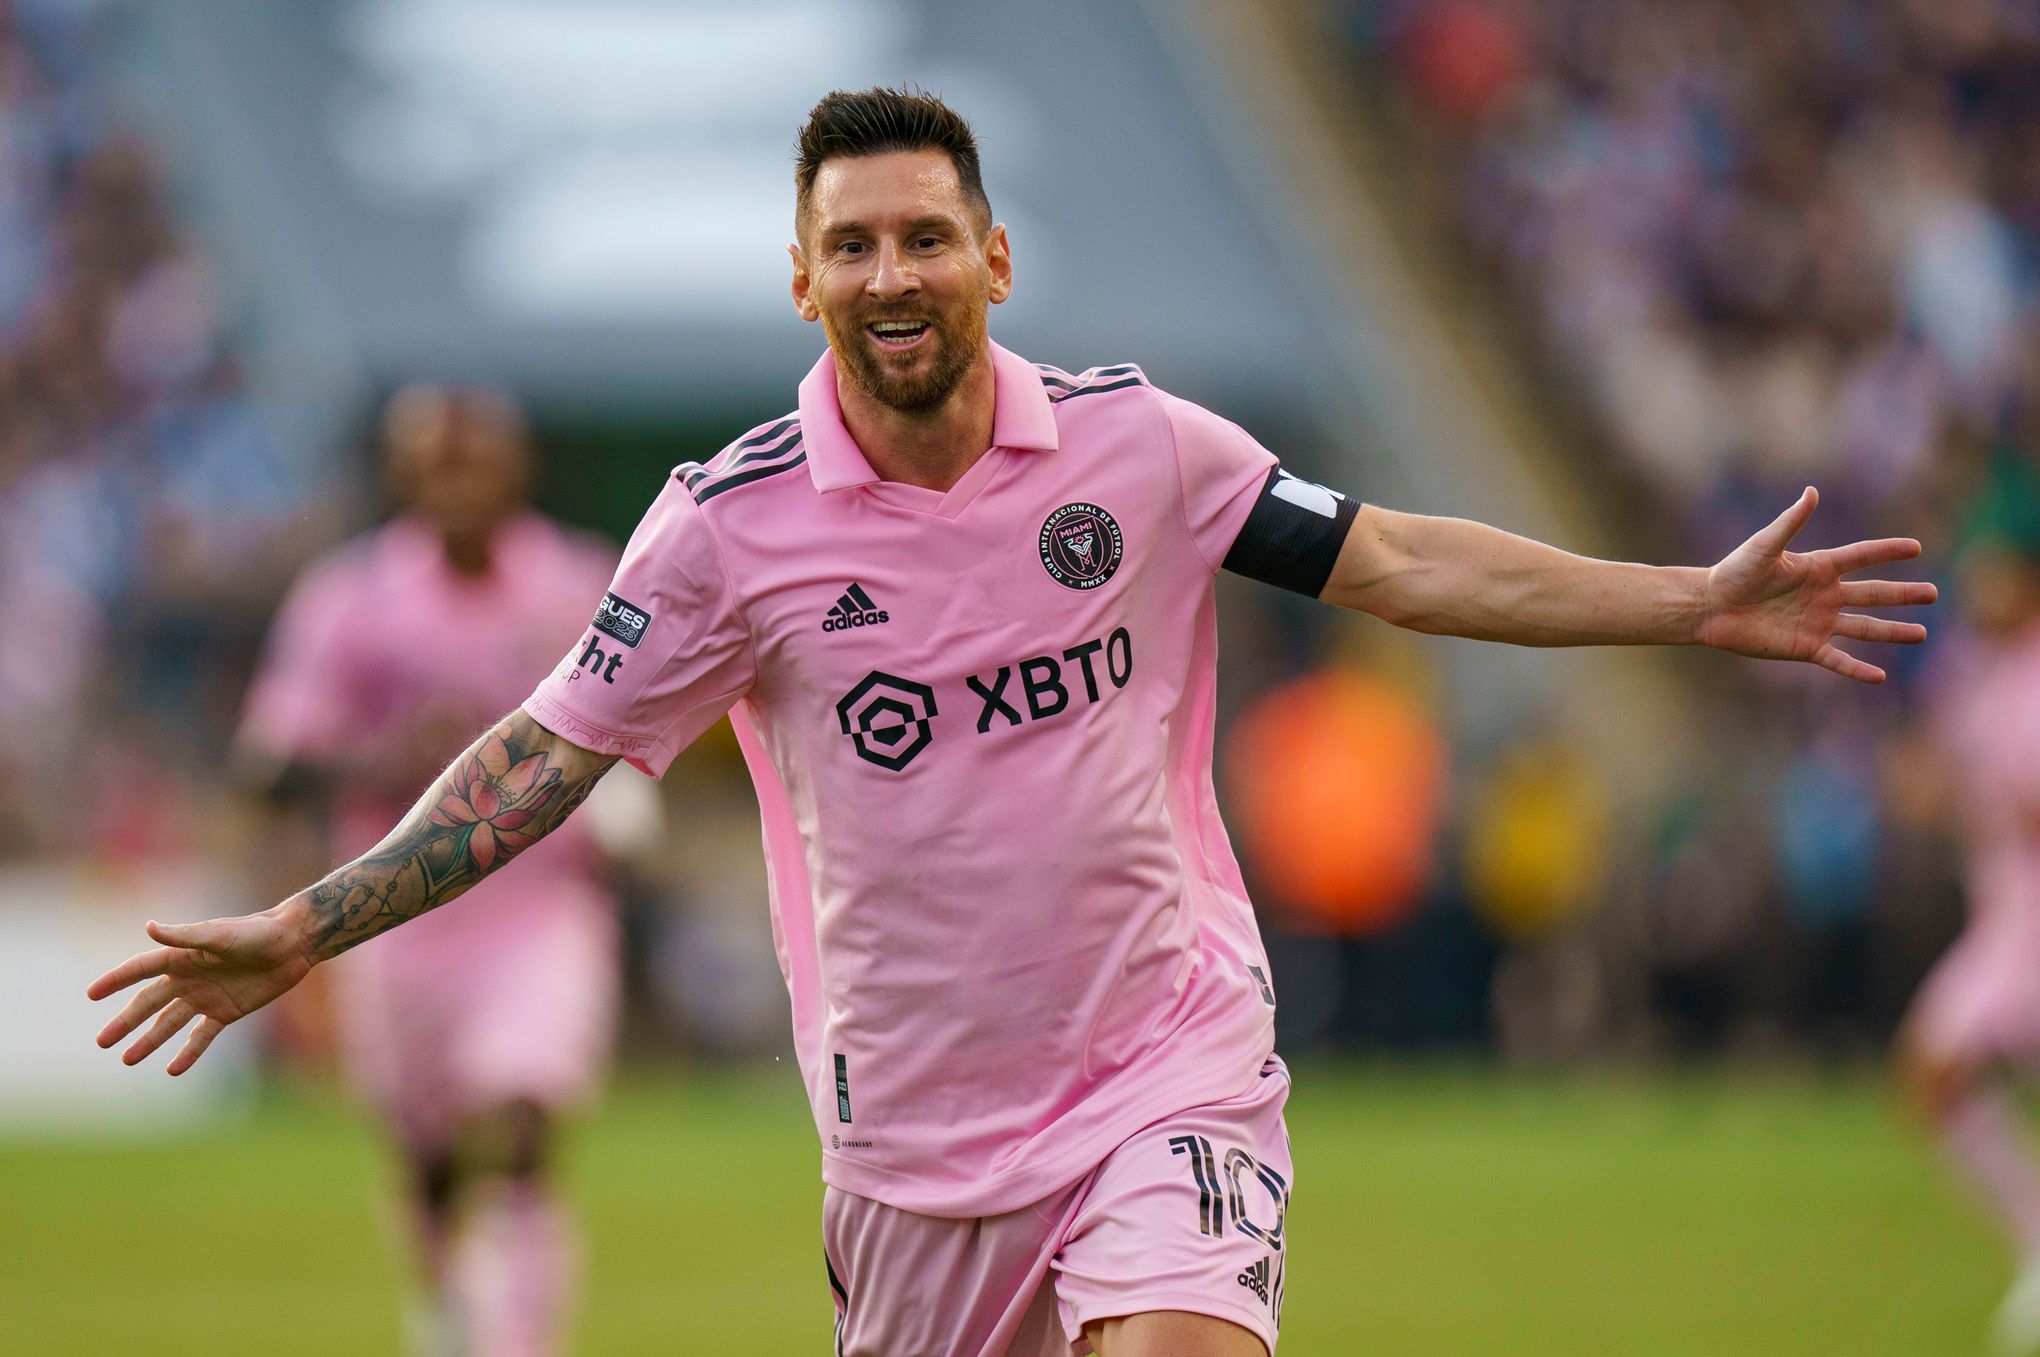 Lionel Messi returns, but Inter Miami's playoff dream ends: Now